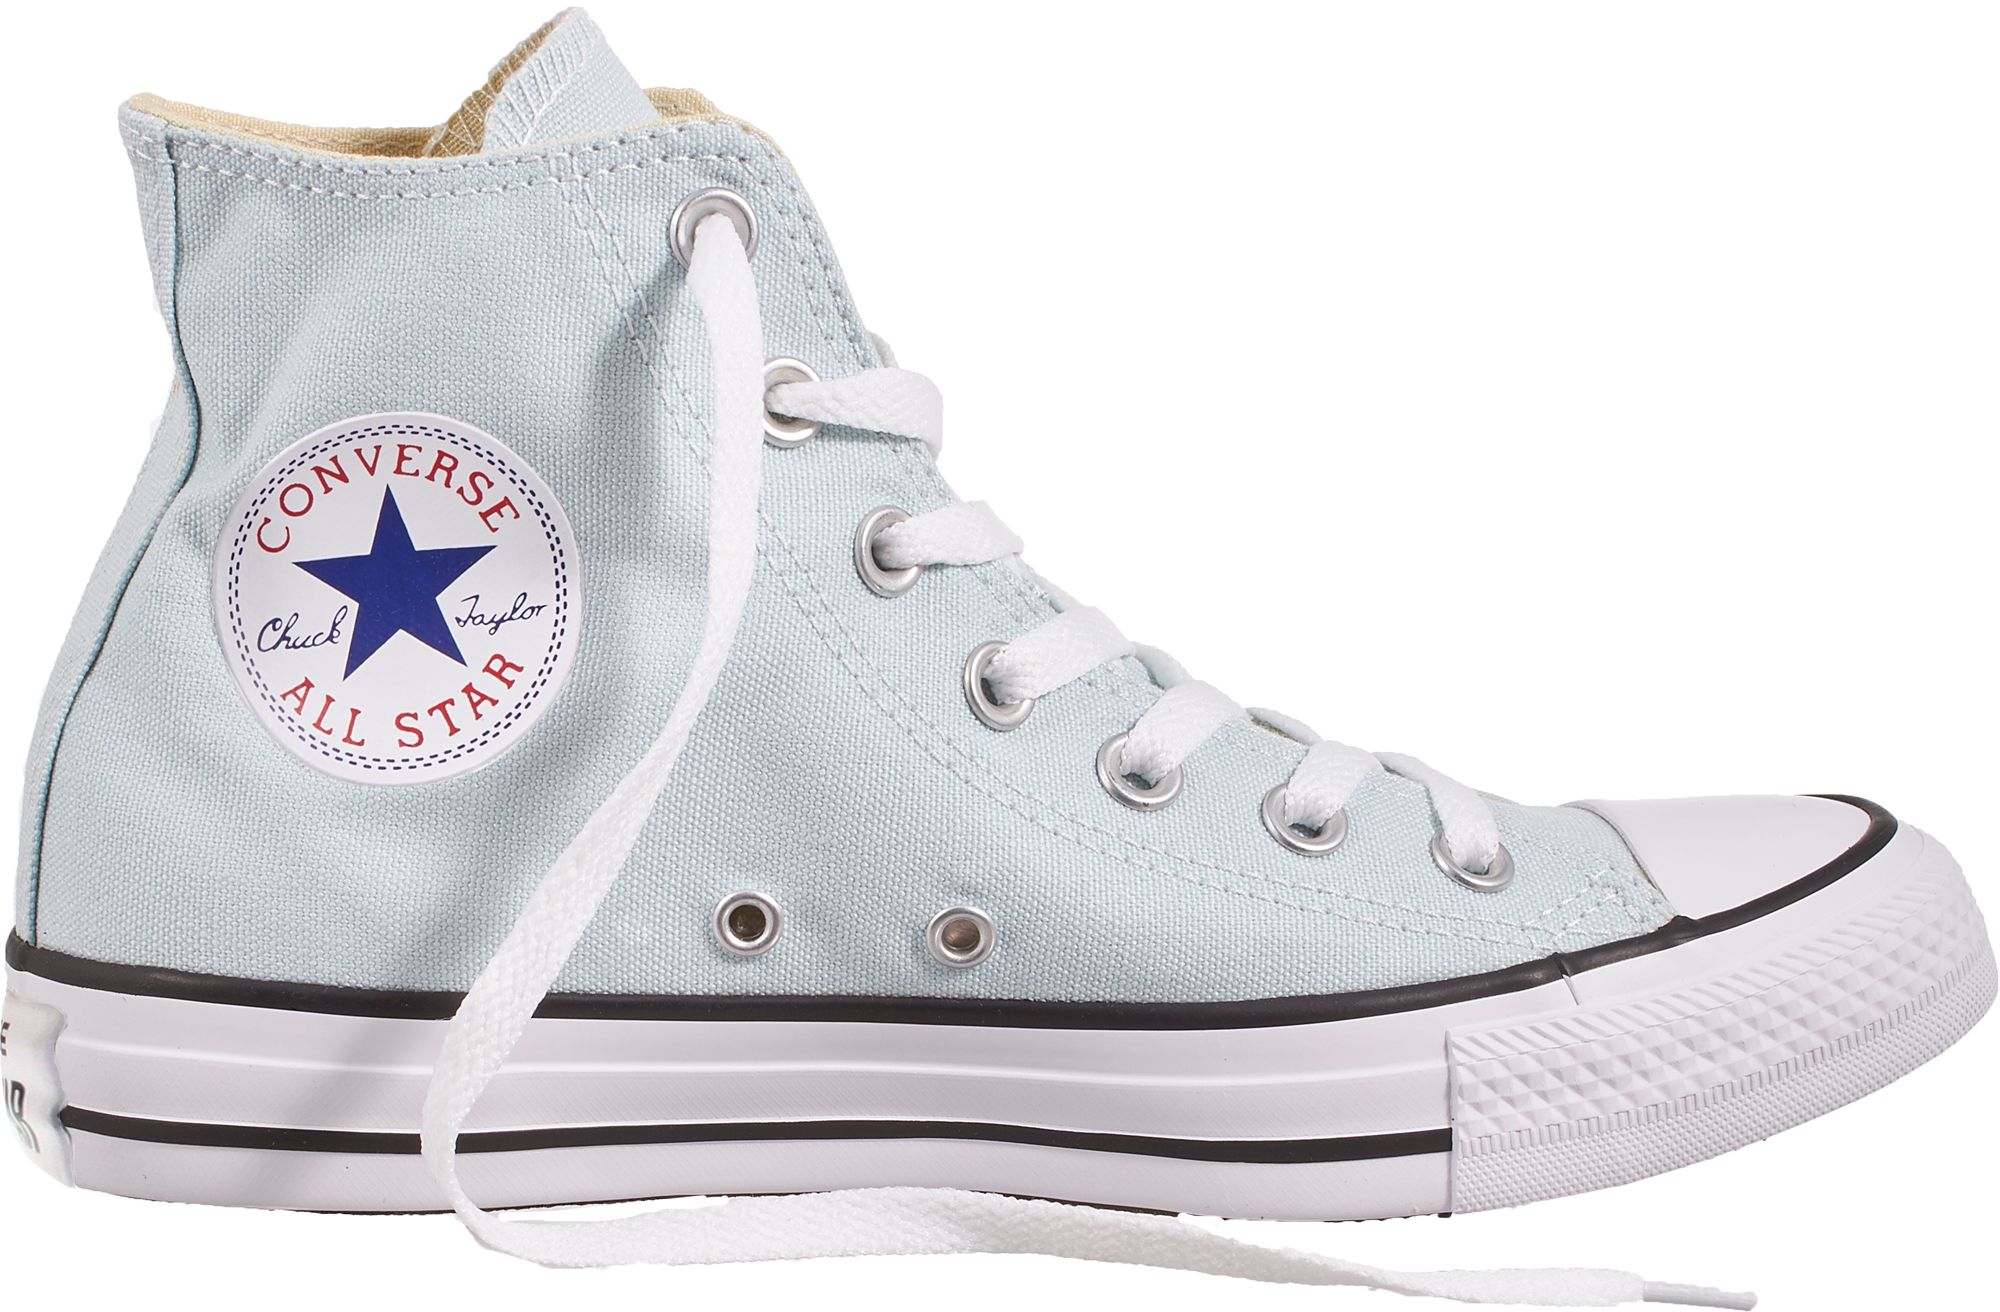 where can i find converse shoes near me